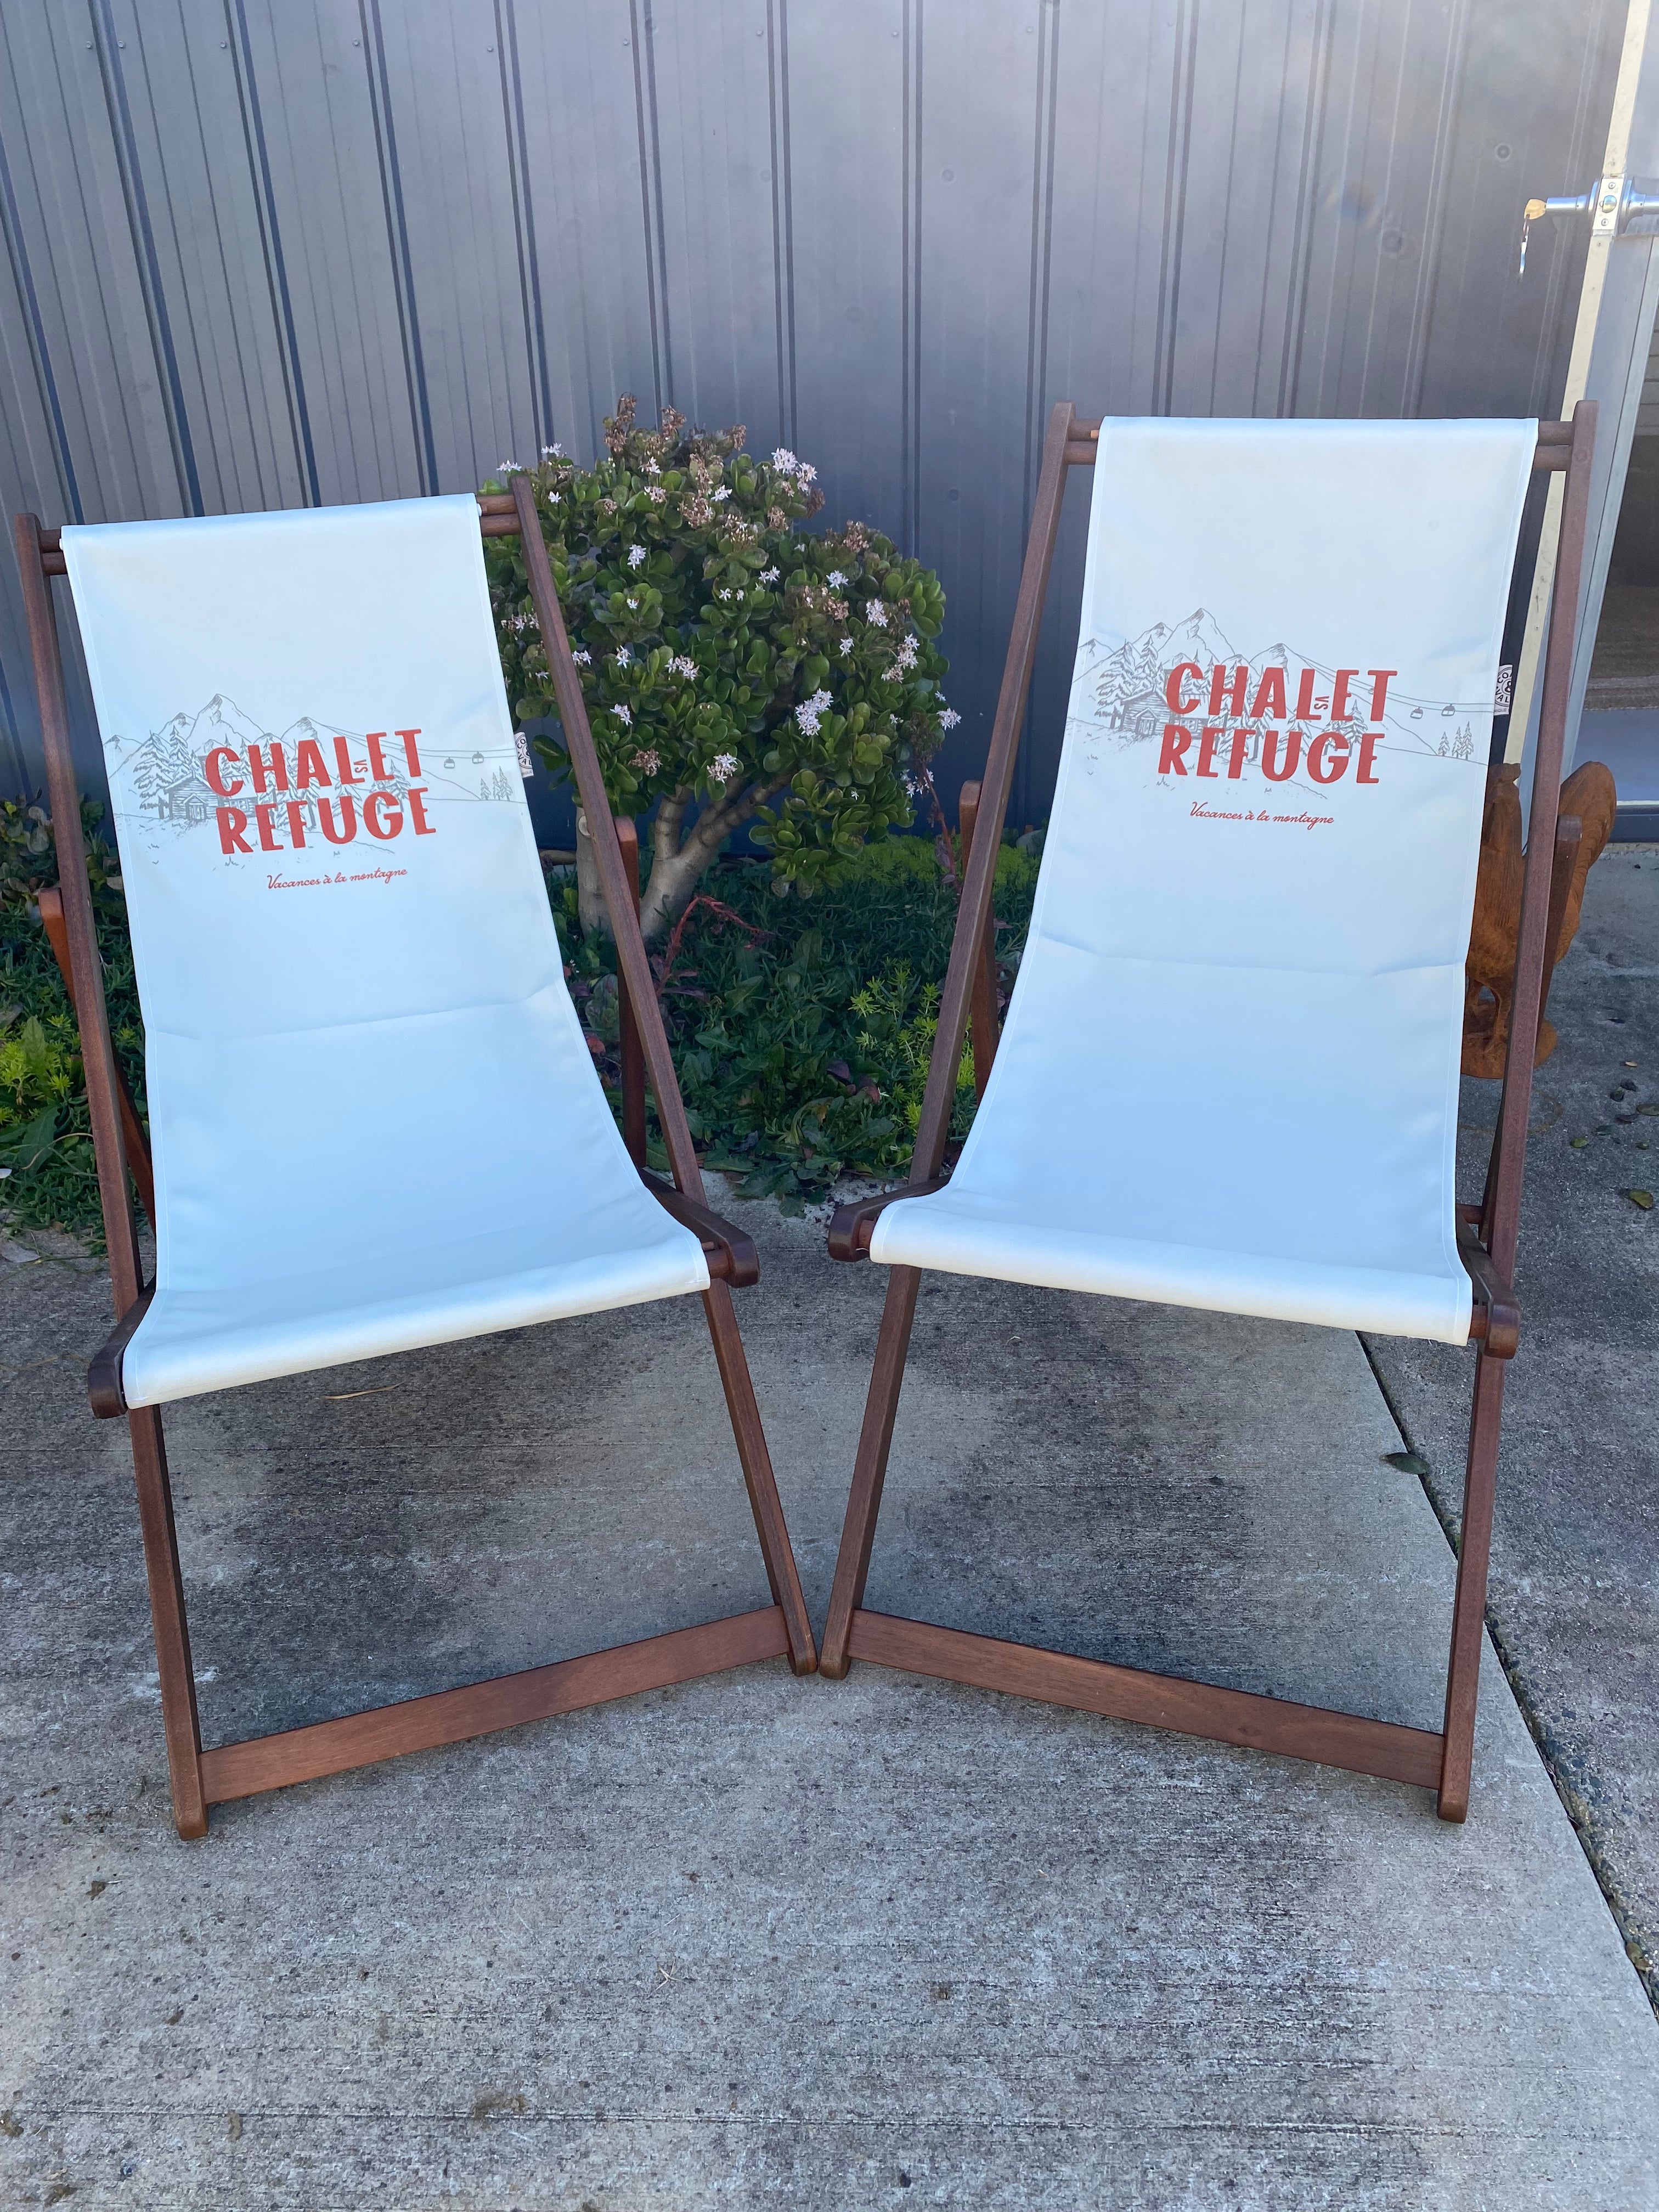 Pair of Coast & Valley Deck Chairs: Chalet vs Refuge design showing words in red with a grey grey chalet surrounded by trees on a plain cream background.2 chairs facing forward. On a concrete floor against a blue steel shed and door with garden bed in the background.